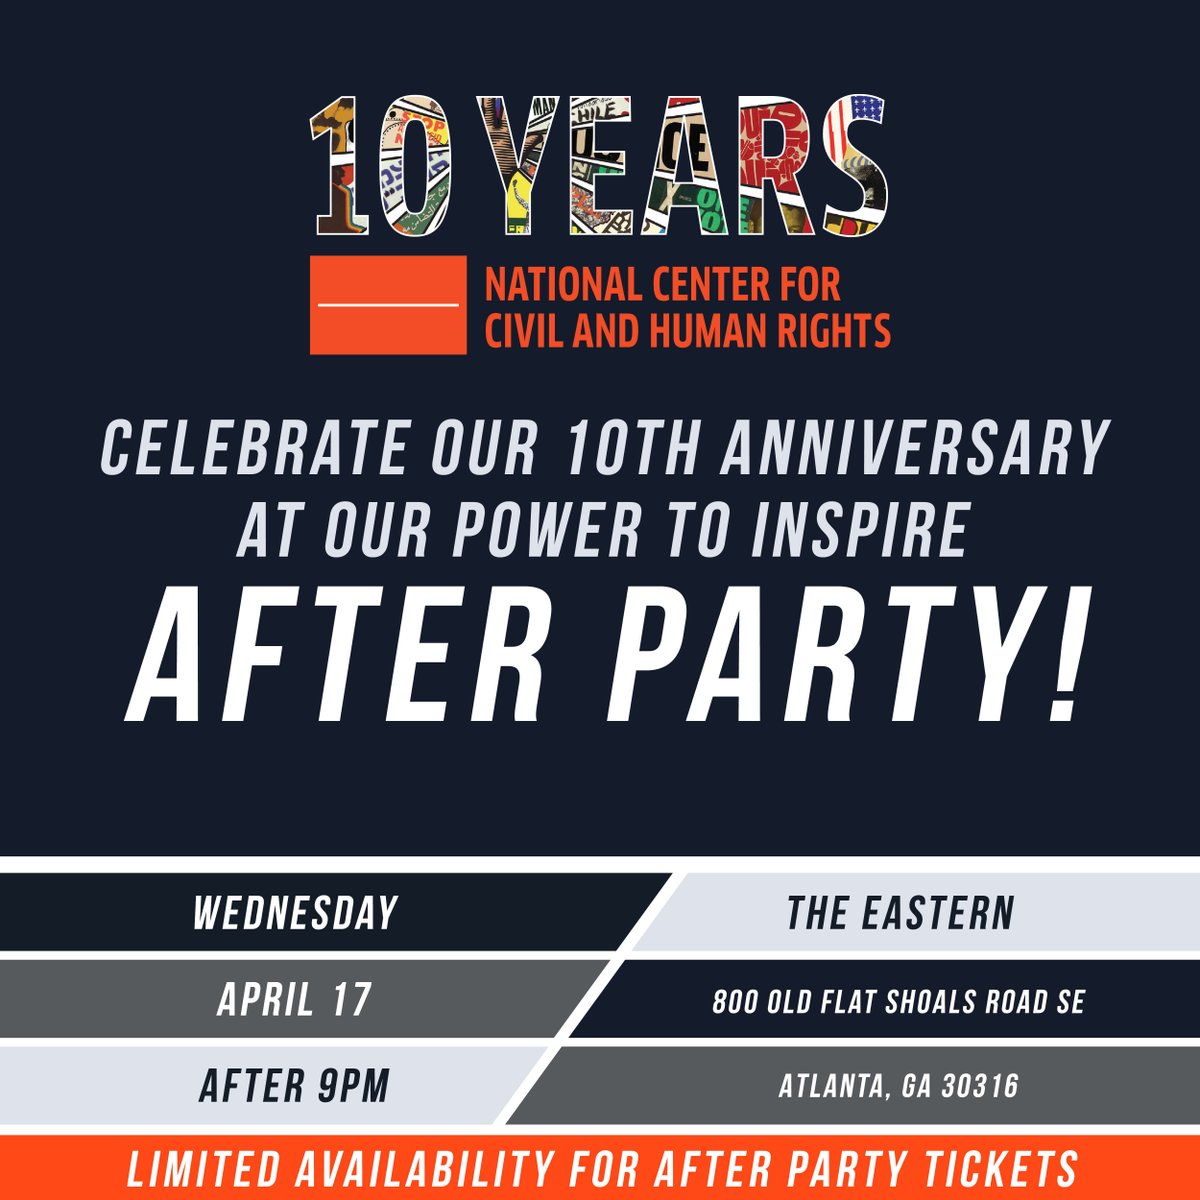 The Center is celebrating our #10thAnniversary of connecting history to the present. That is worth celebrating! For a limited time, you can add our after-party celebration to your #PTI2024 ticket and join us for a rooftop party! ow.ly/mhk750QBnz3